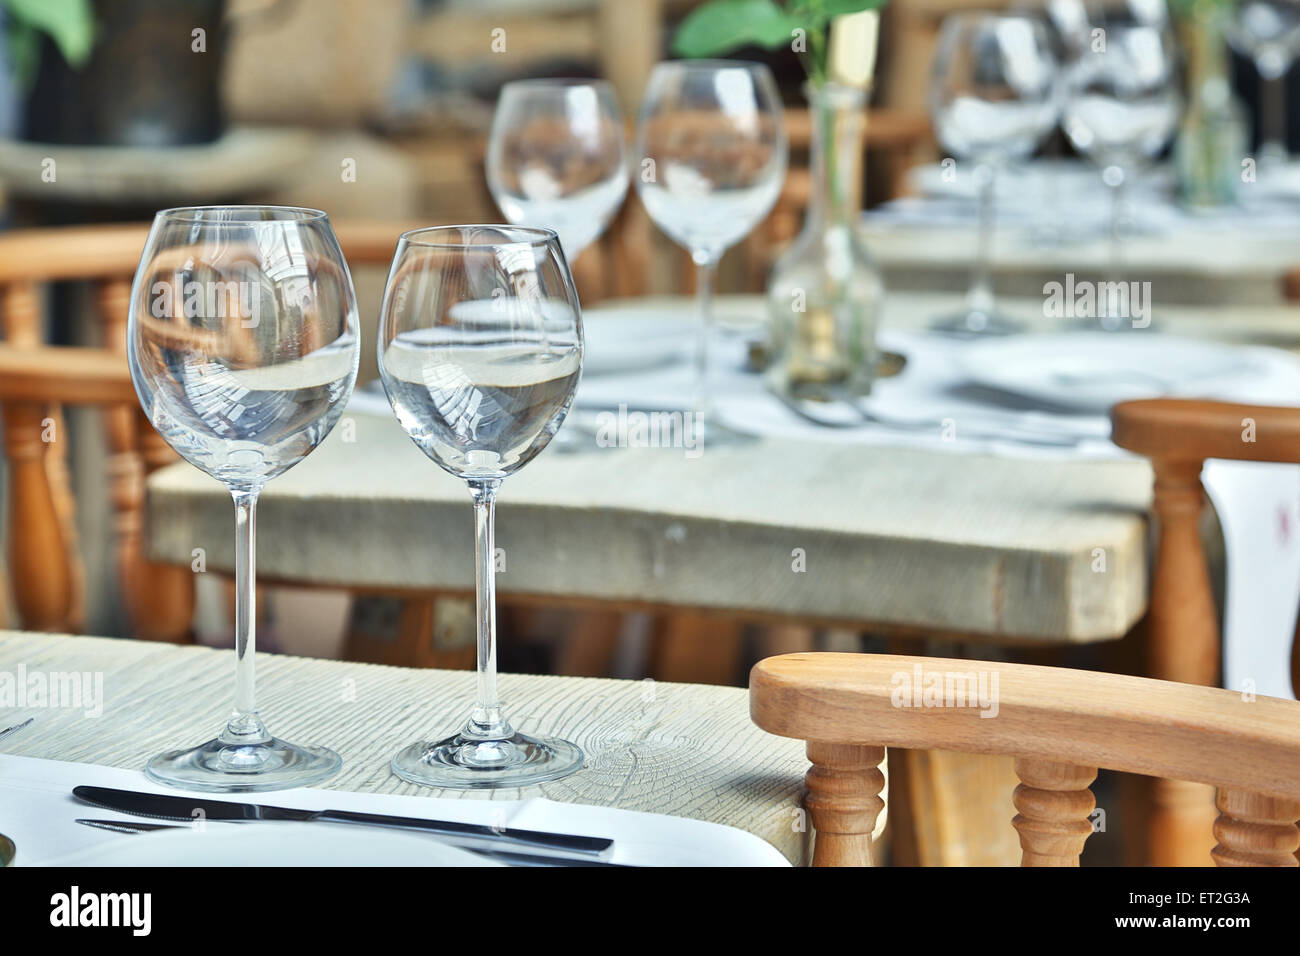 Table setting with wine glasses at the vintage cafe. Stock Photo